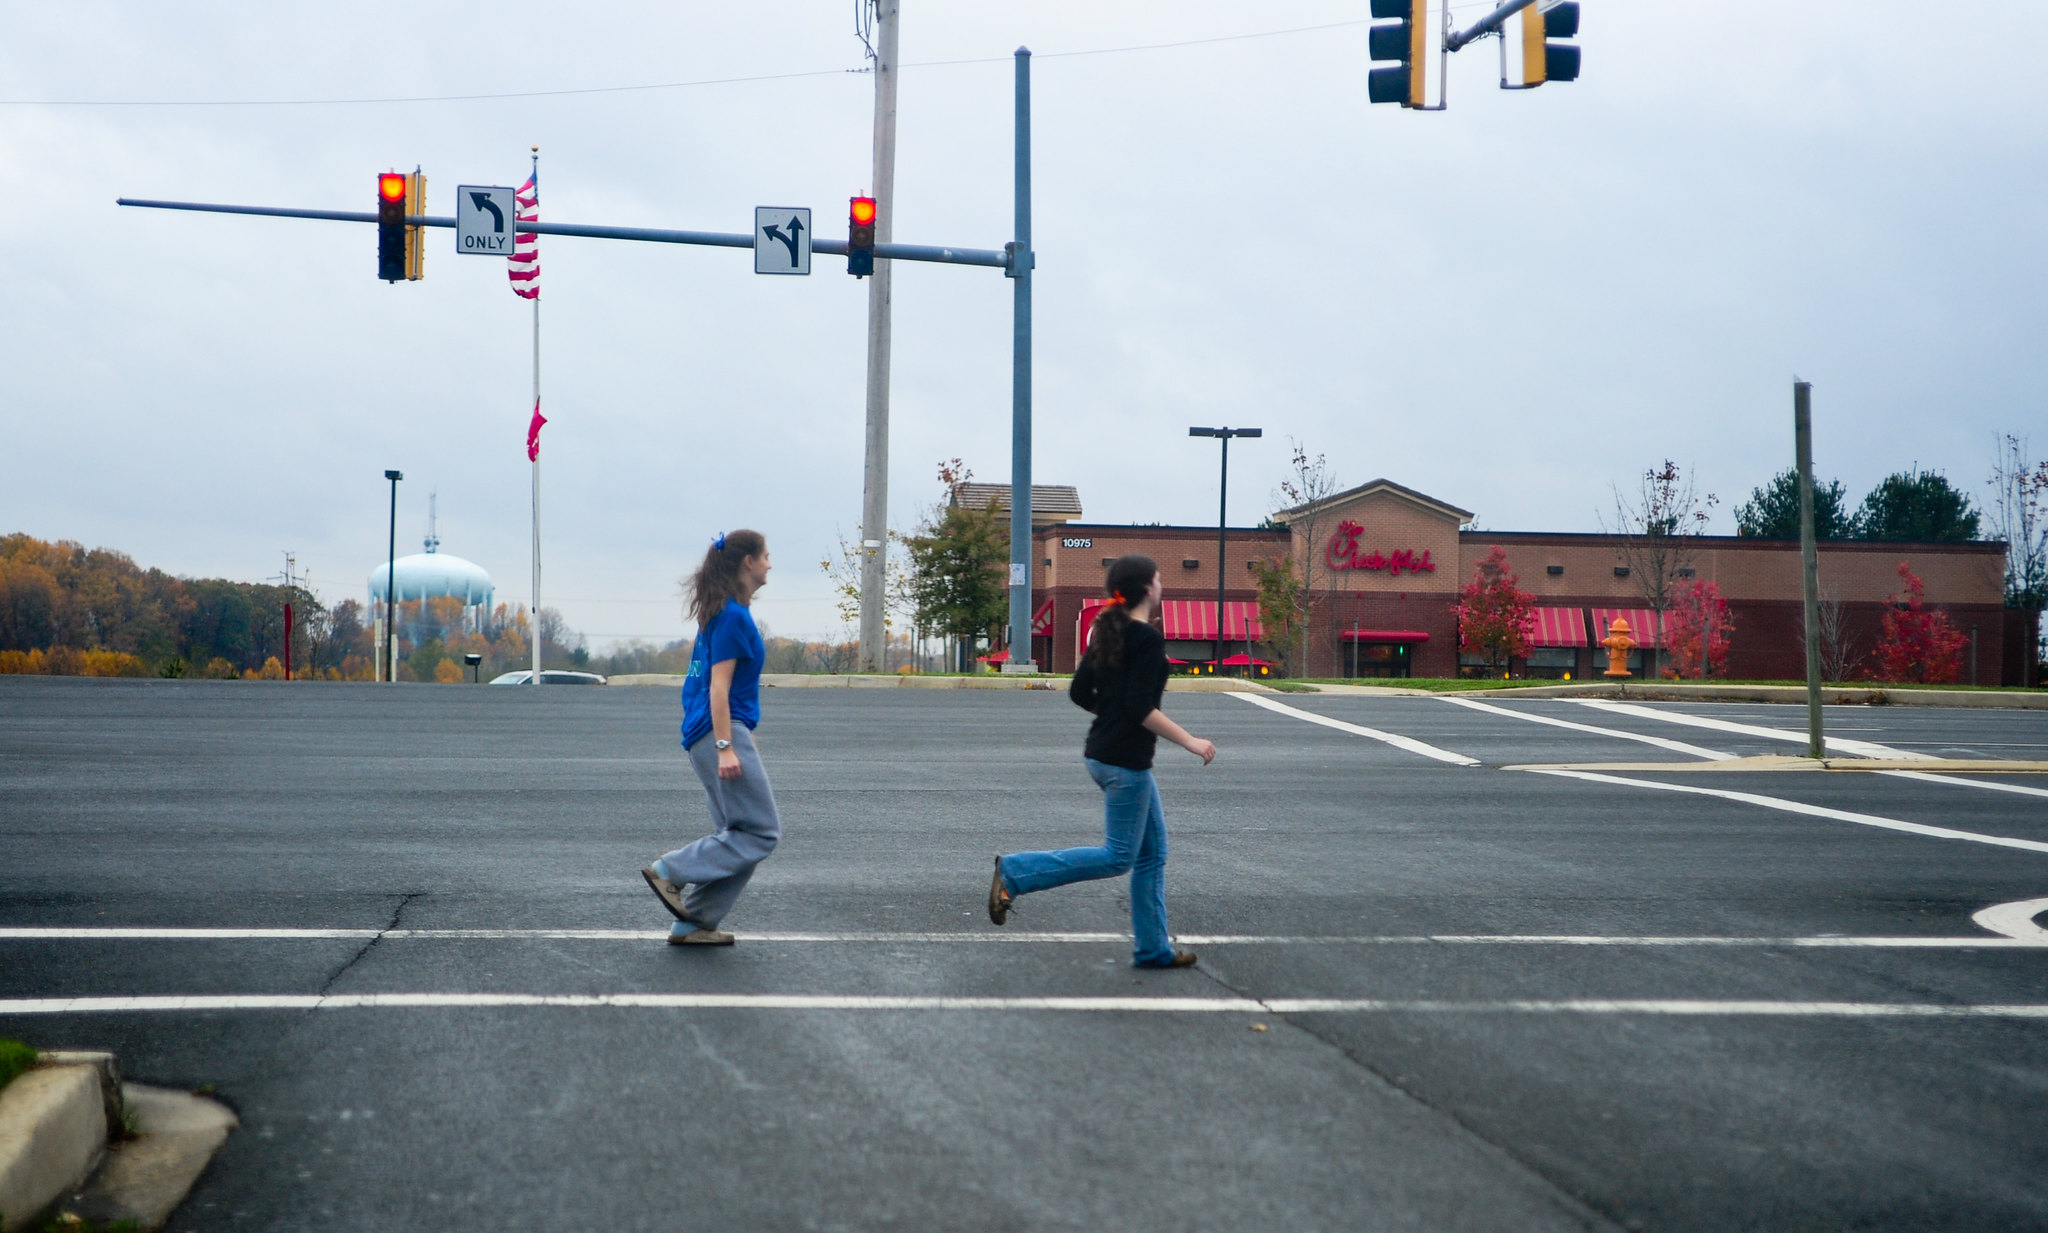 Pedestrian deaths and fatal car crashes are predictable. How do we prevent them?